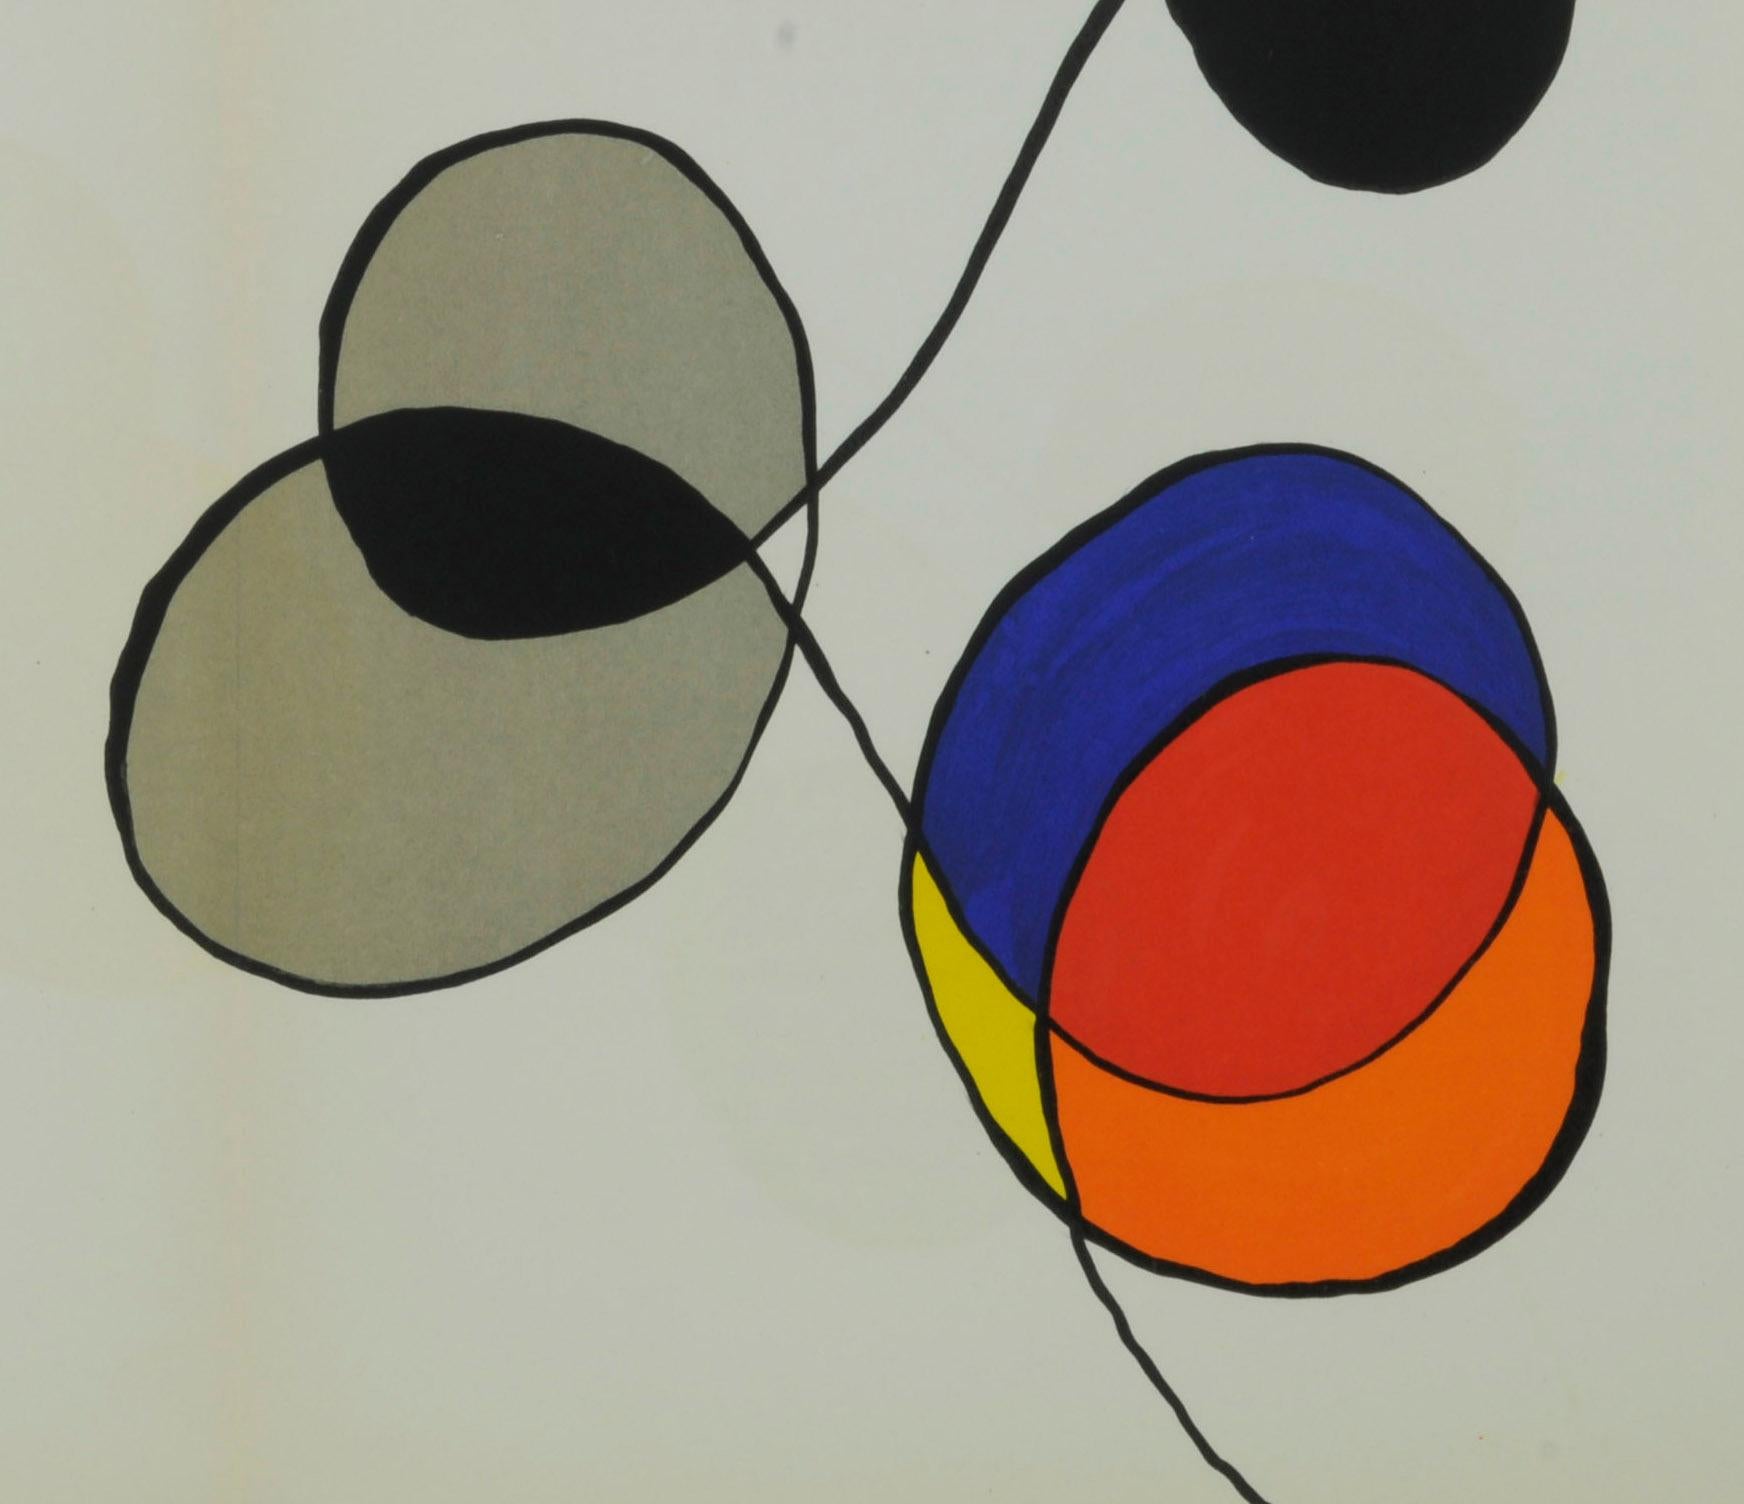 Untitled Double Page Illustration for DLM - American Modern Print by Alexander Calder